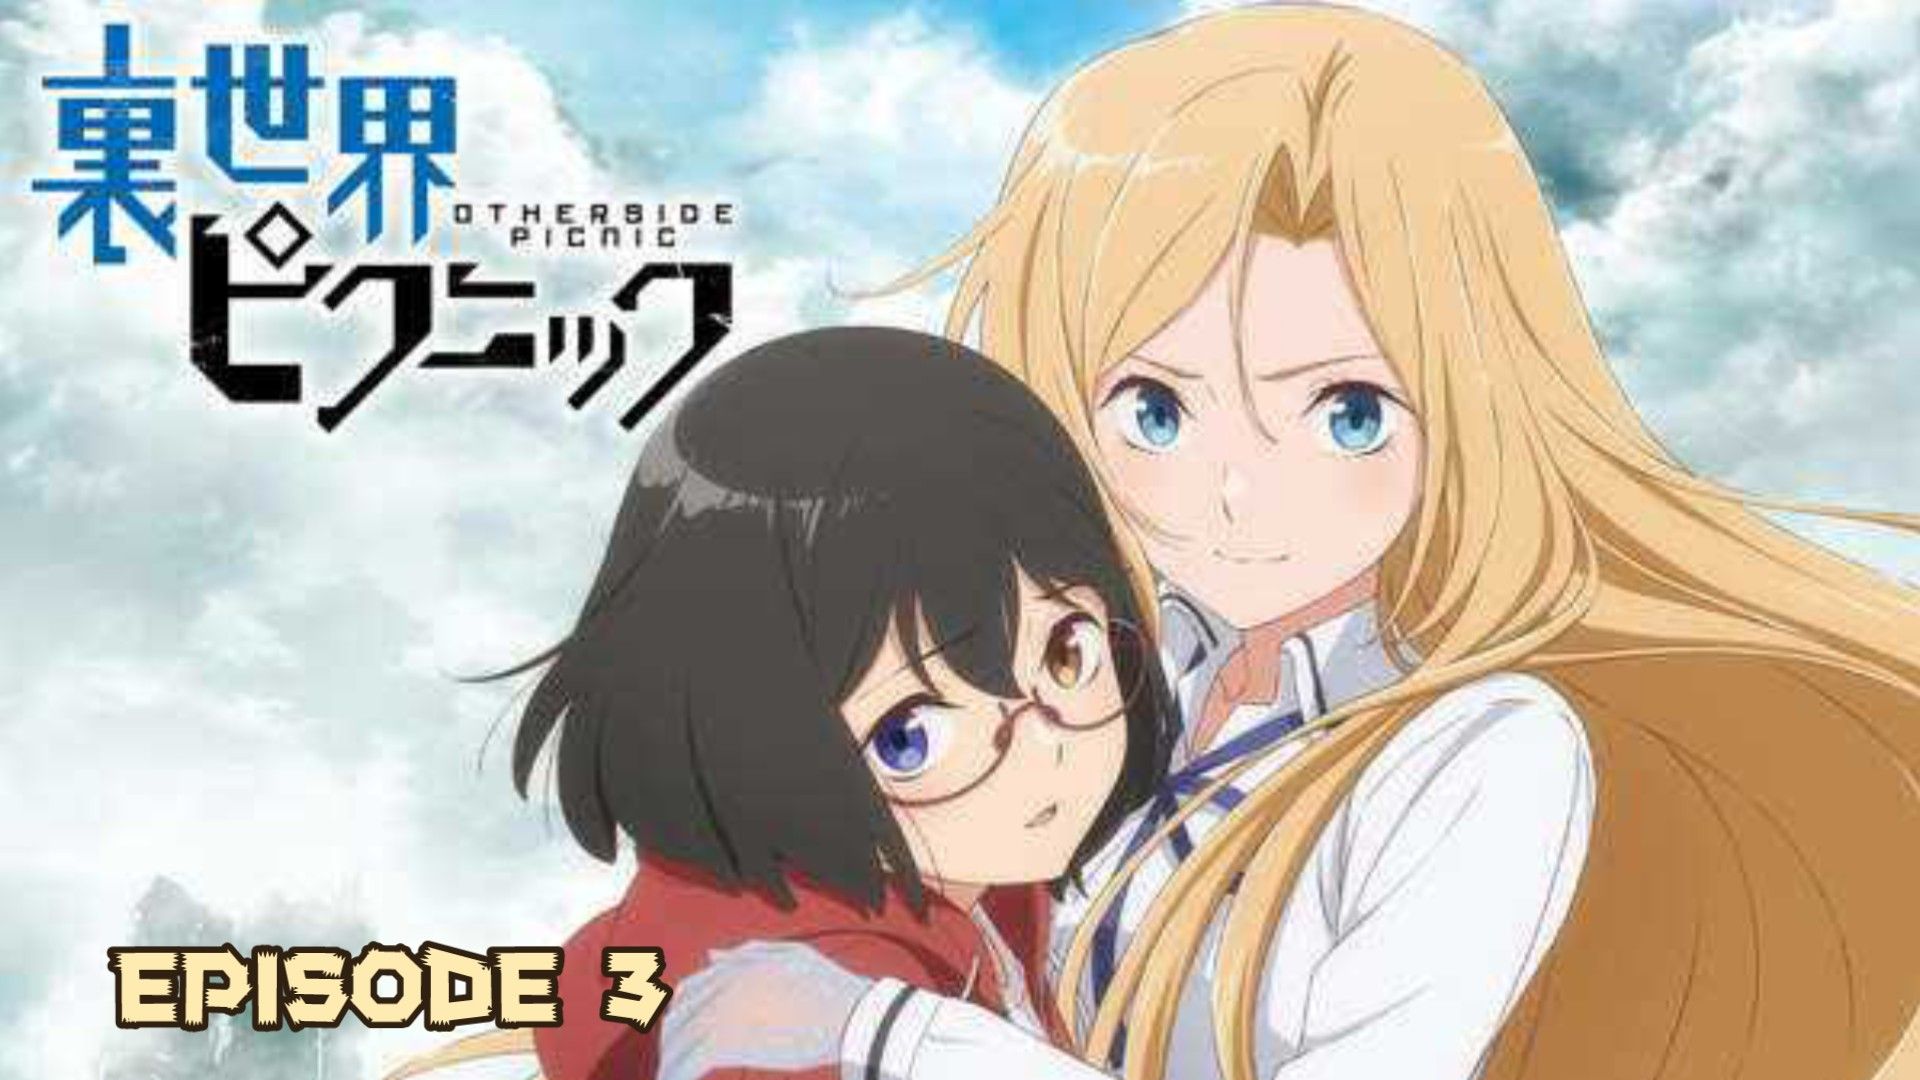 Otherside Picnic Episode 3 - Love Shack - I drink and watch anime